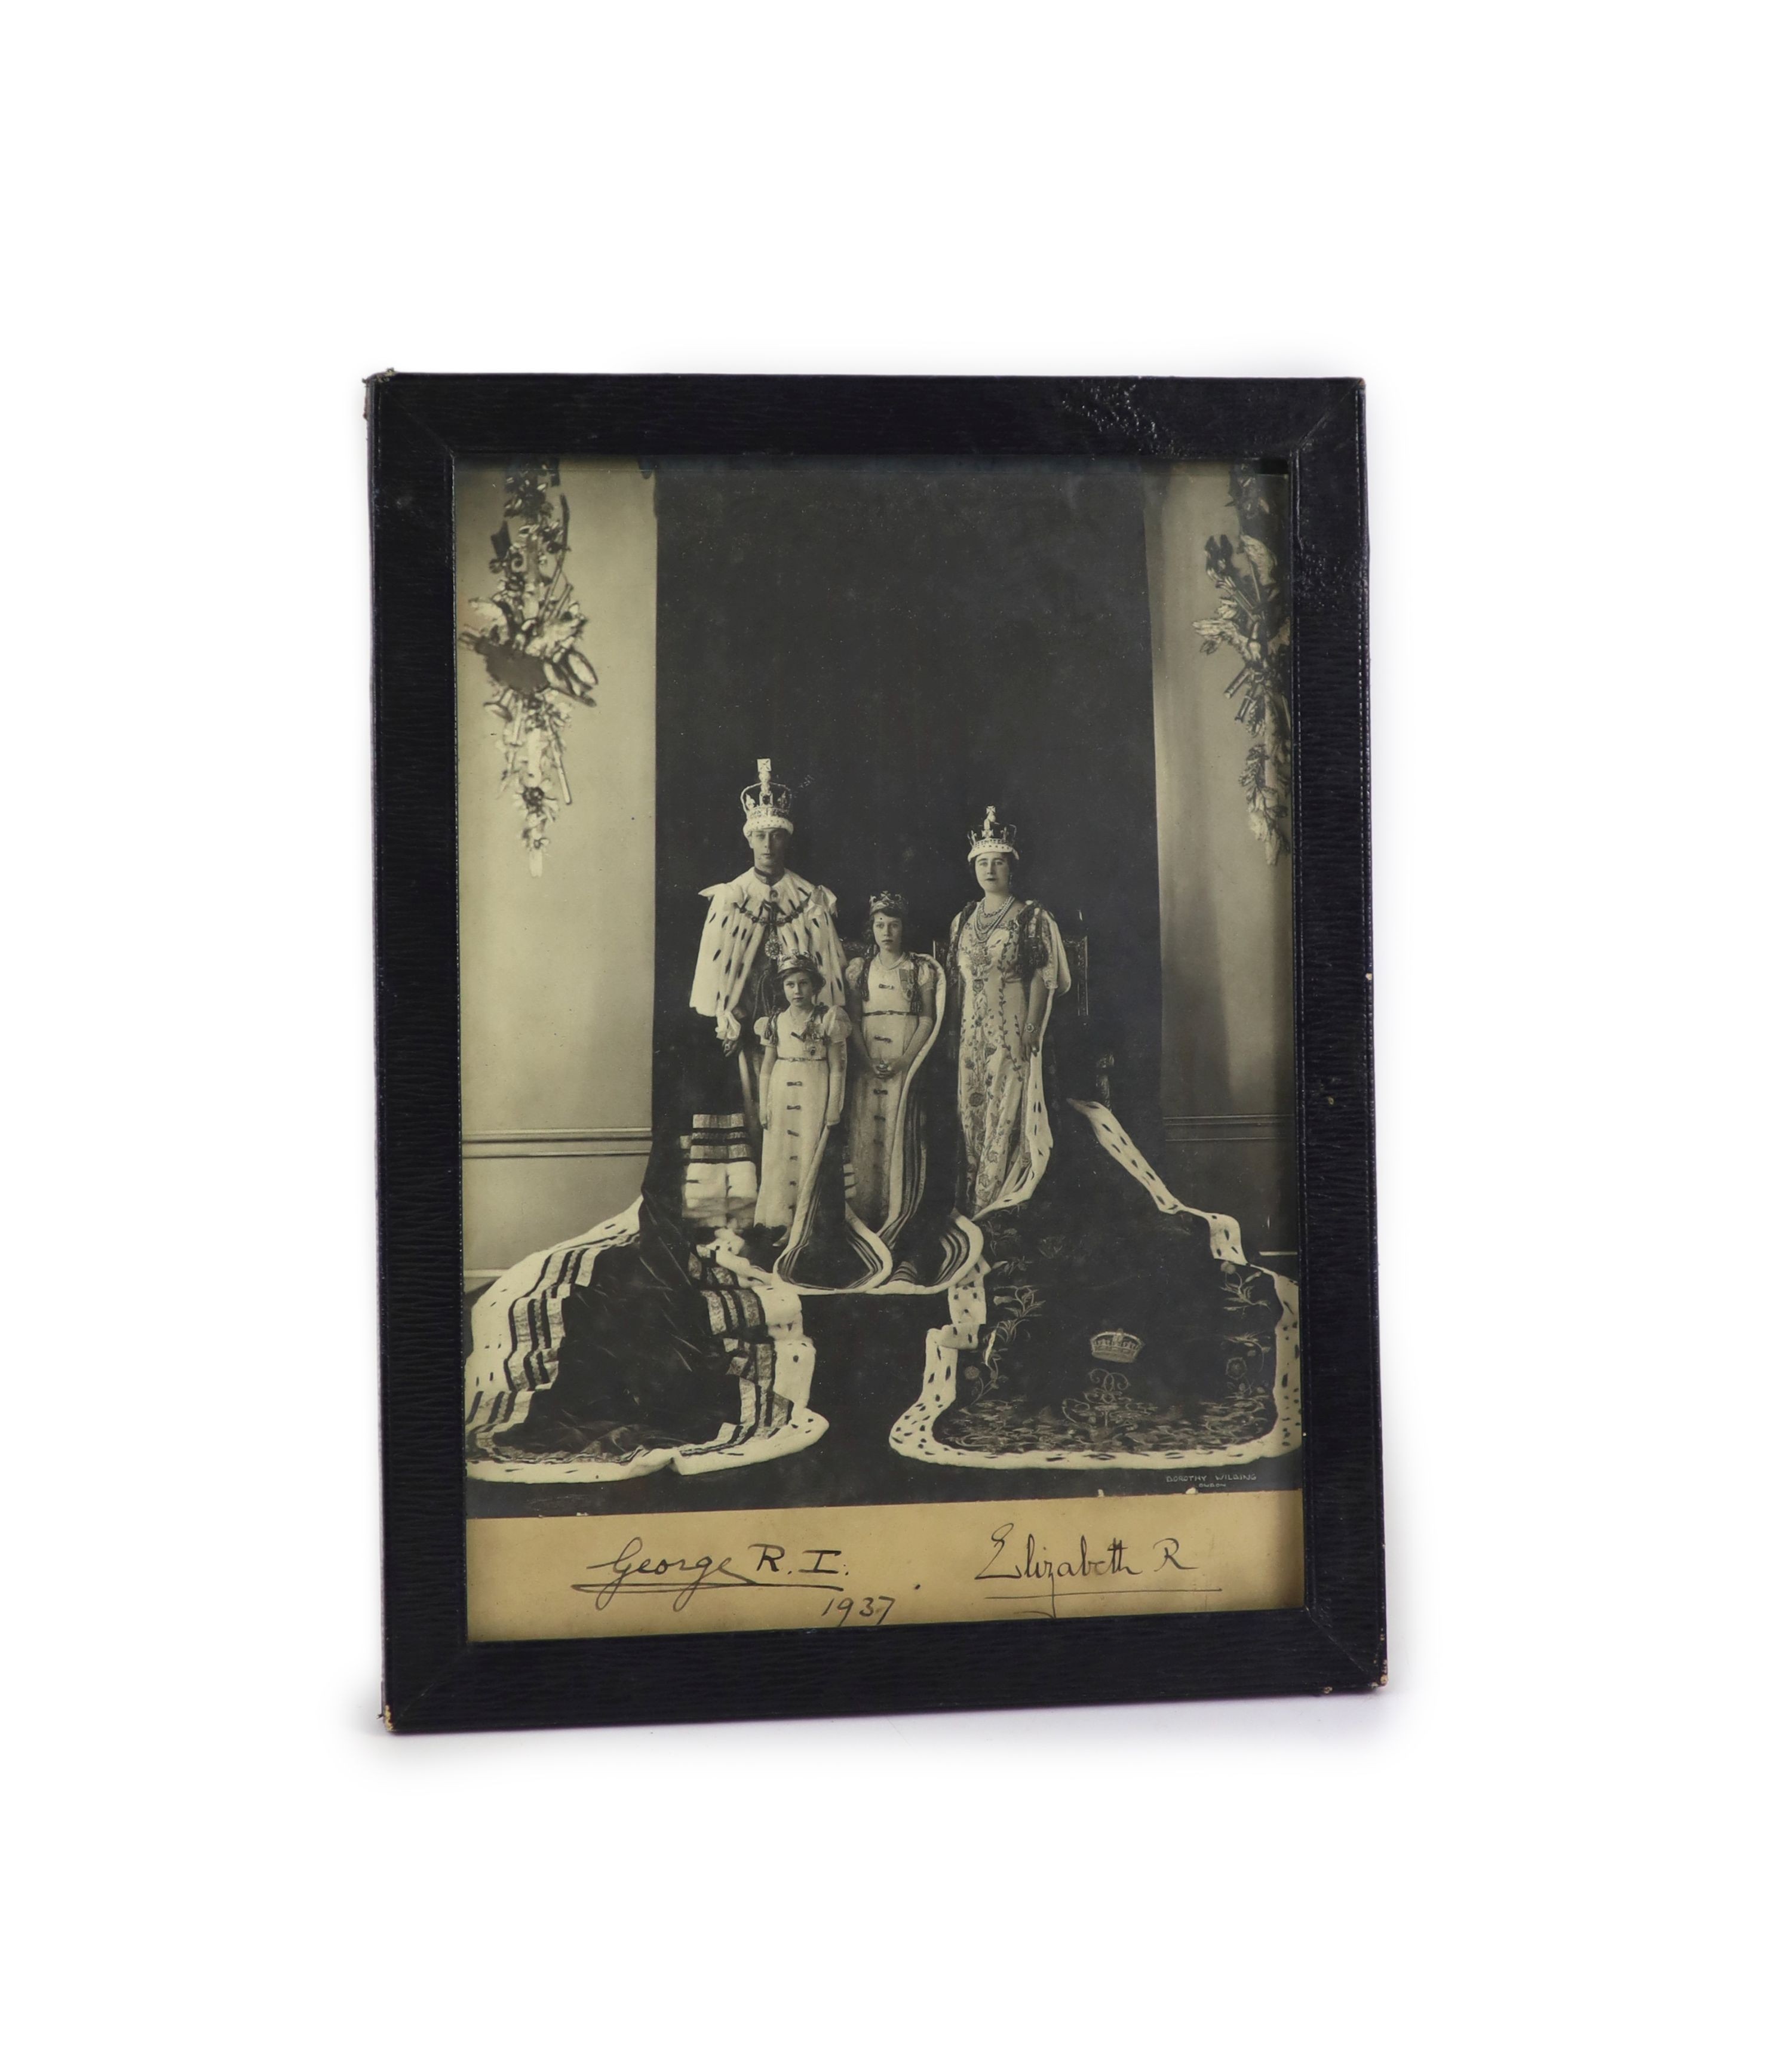 Royal Interest - a signed photograph of George VI, Queen Elizabeth and Princesses Elizabeth and Margaret in formal robes, dated 1937, Frame 32 x 24 cm